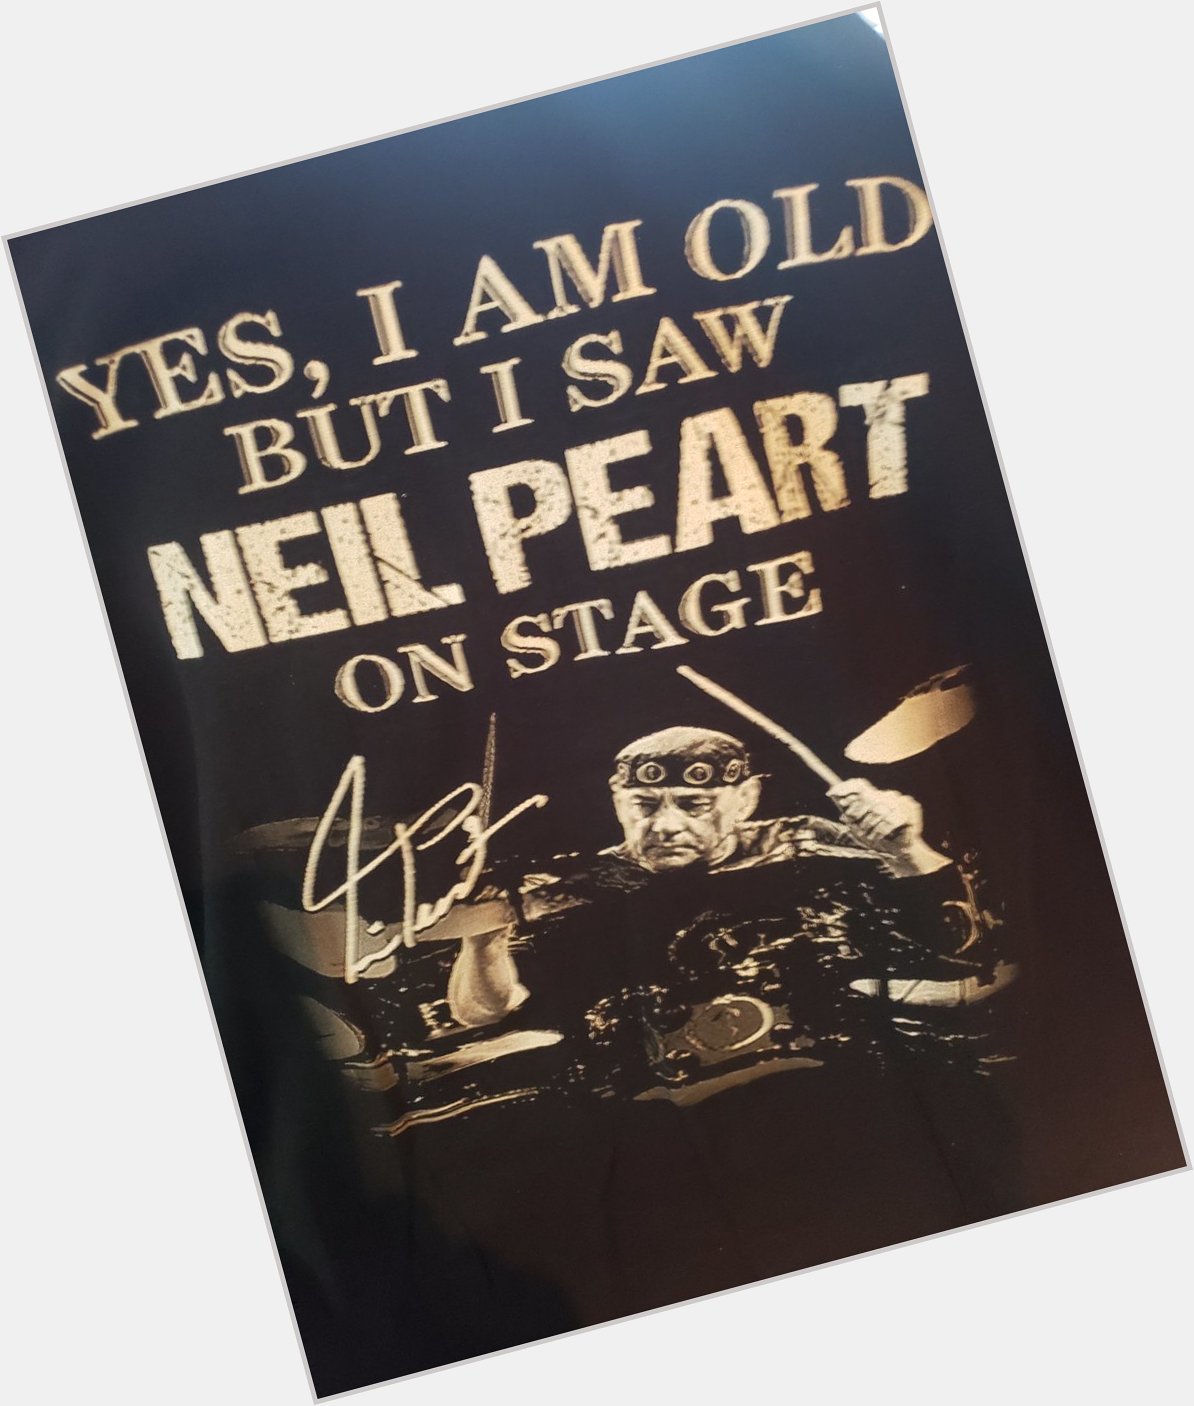    Happy Birthday to Neil Peart the Professor on the Drum Kit, RIP. 